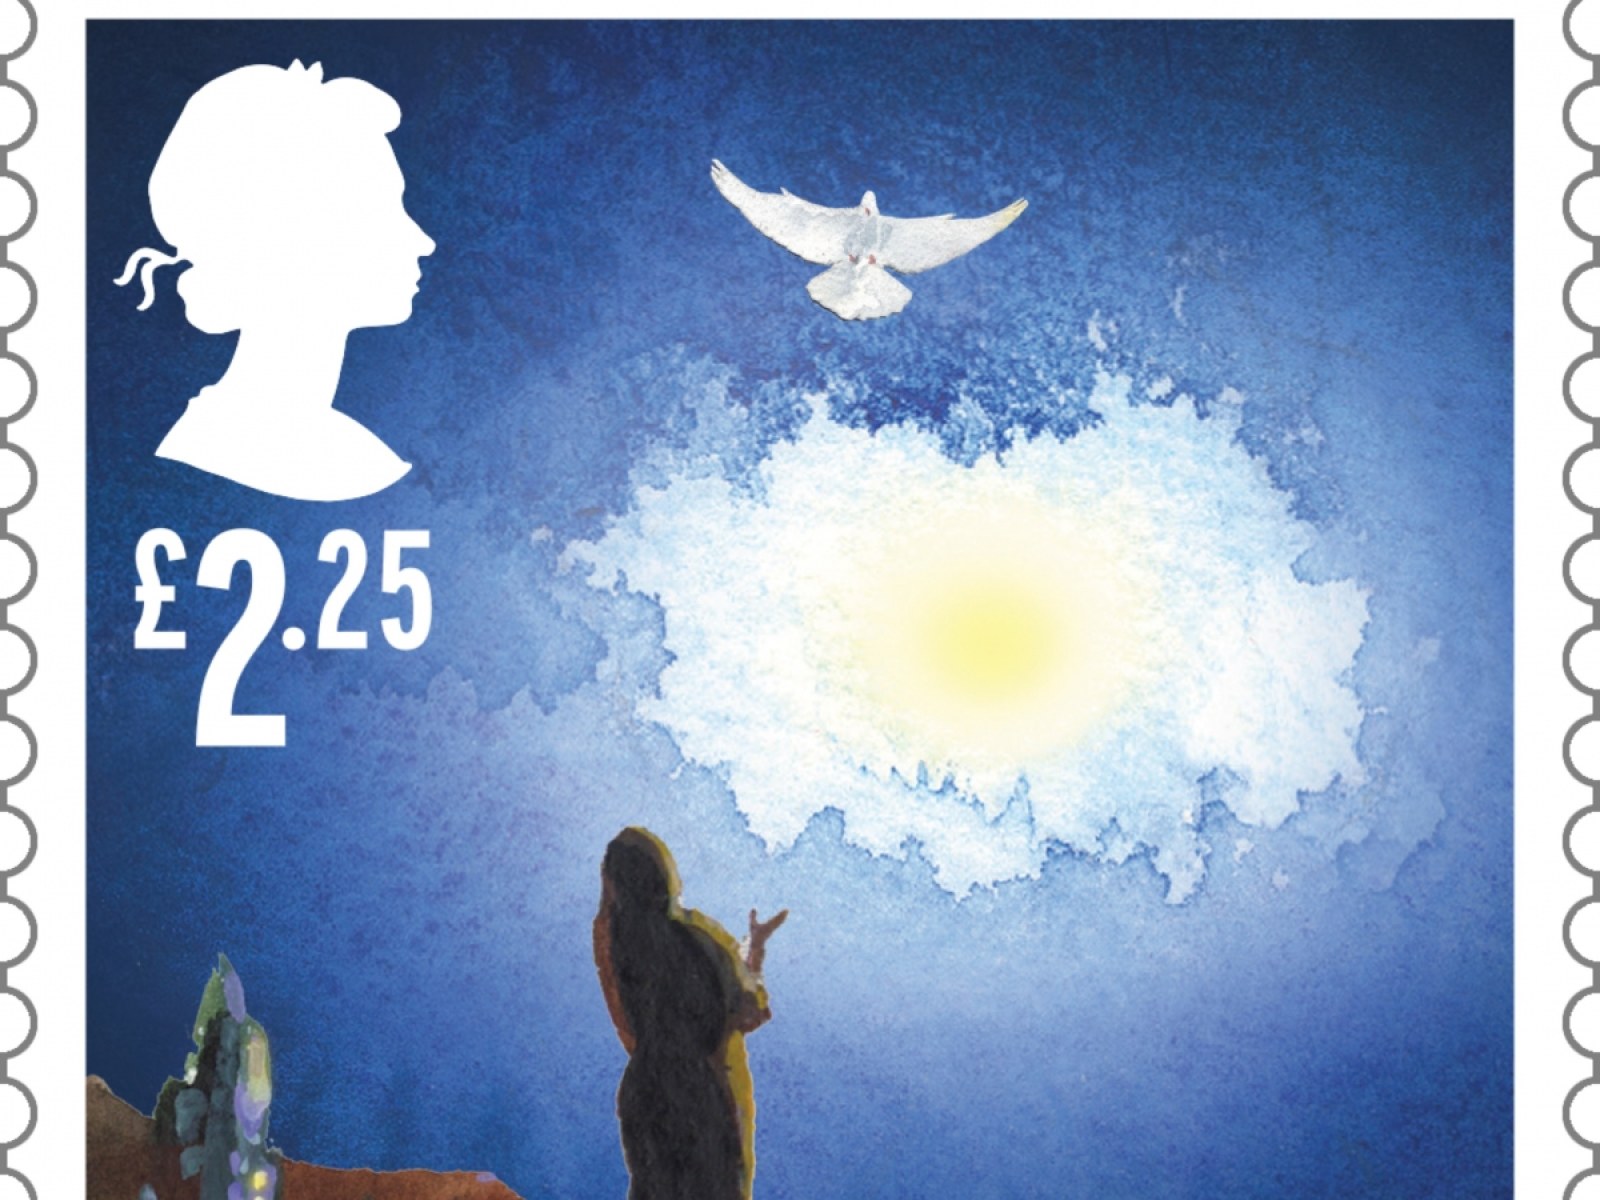 Royal Mail releases 2015 Christmas stamp series featuring scenes from the  Nativity